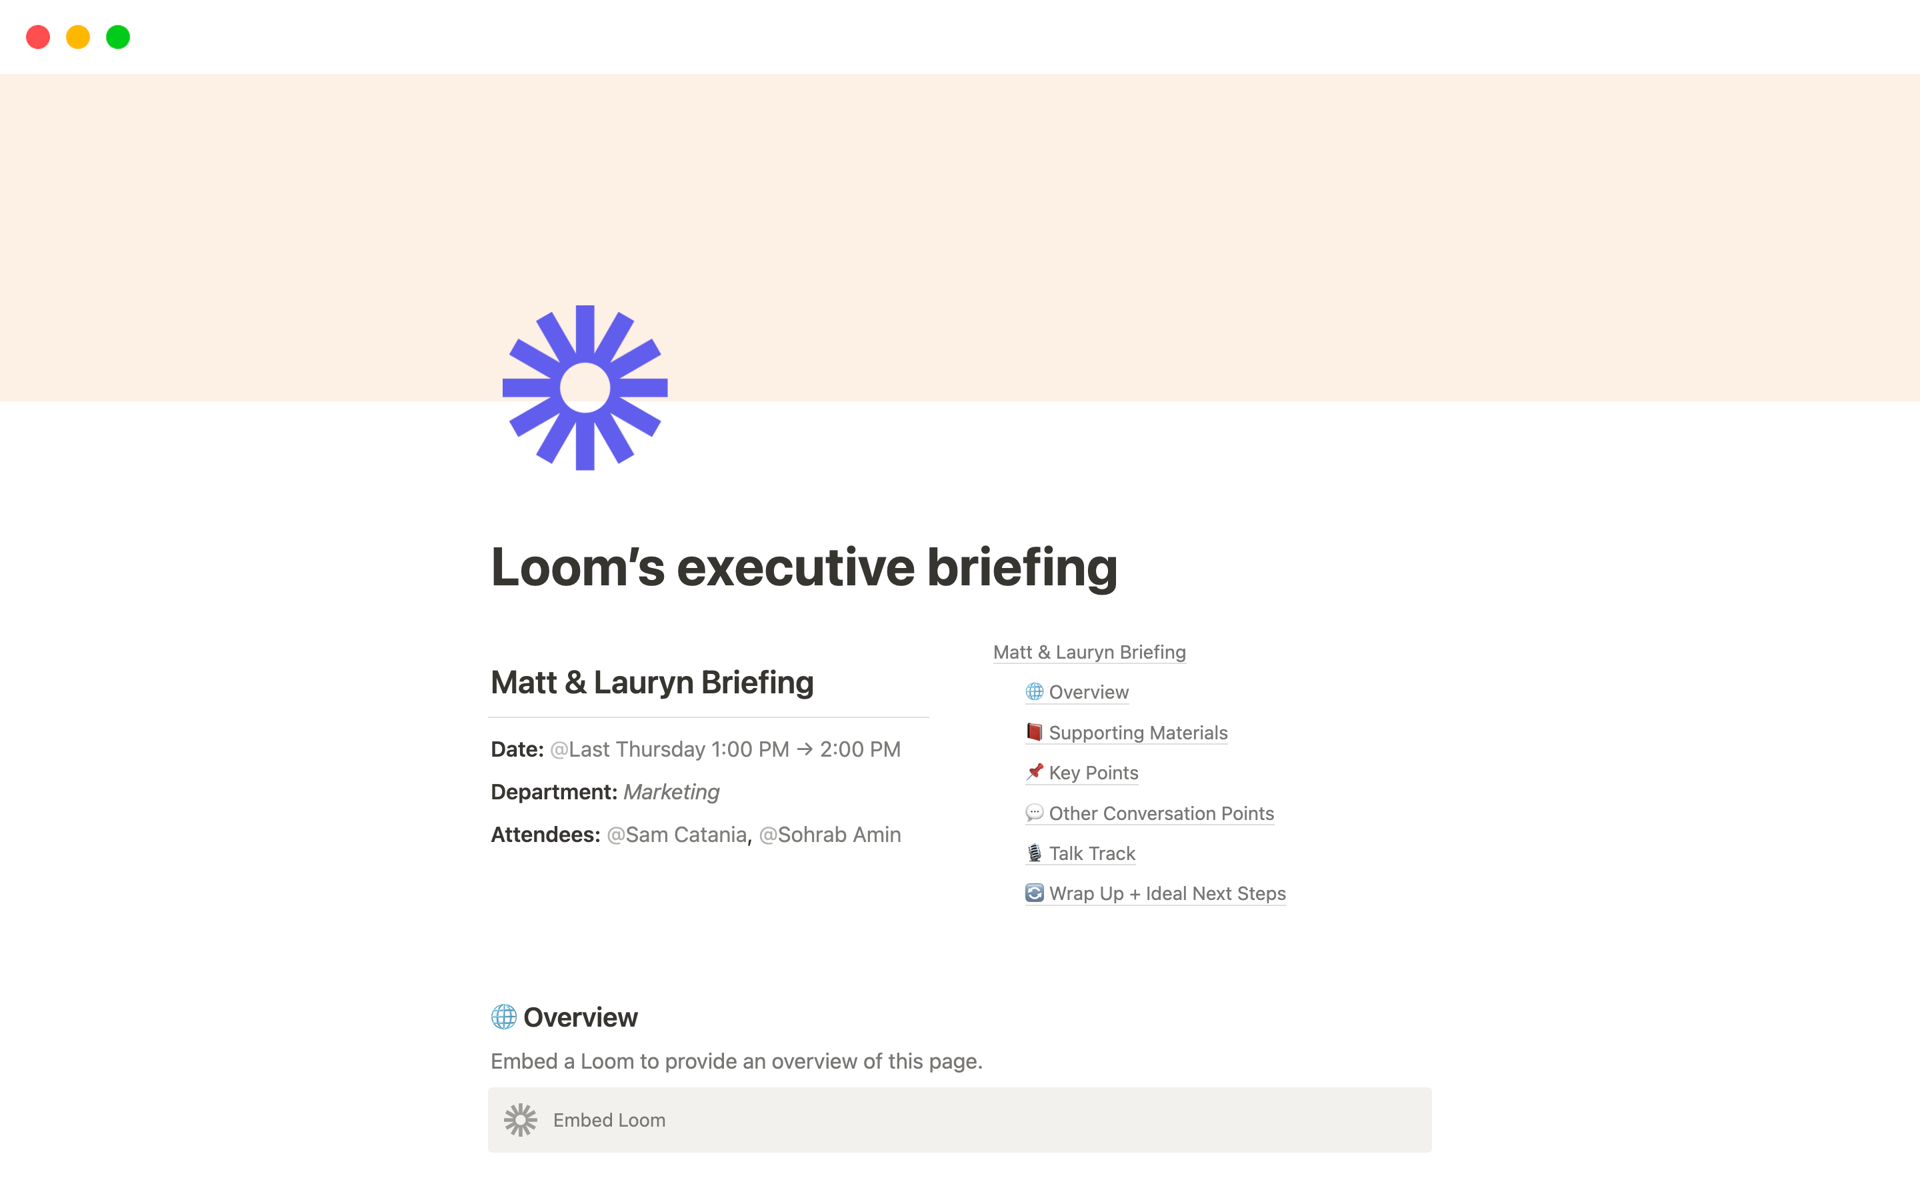 Make sure your executives are prepared for every meeting using Loom’s Executive Briefing template.